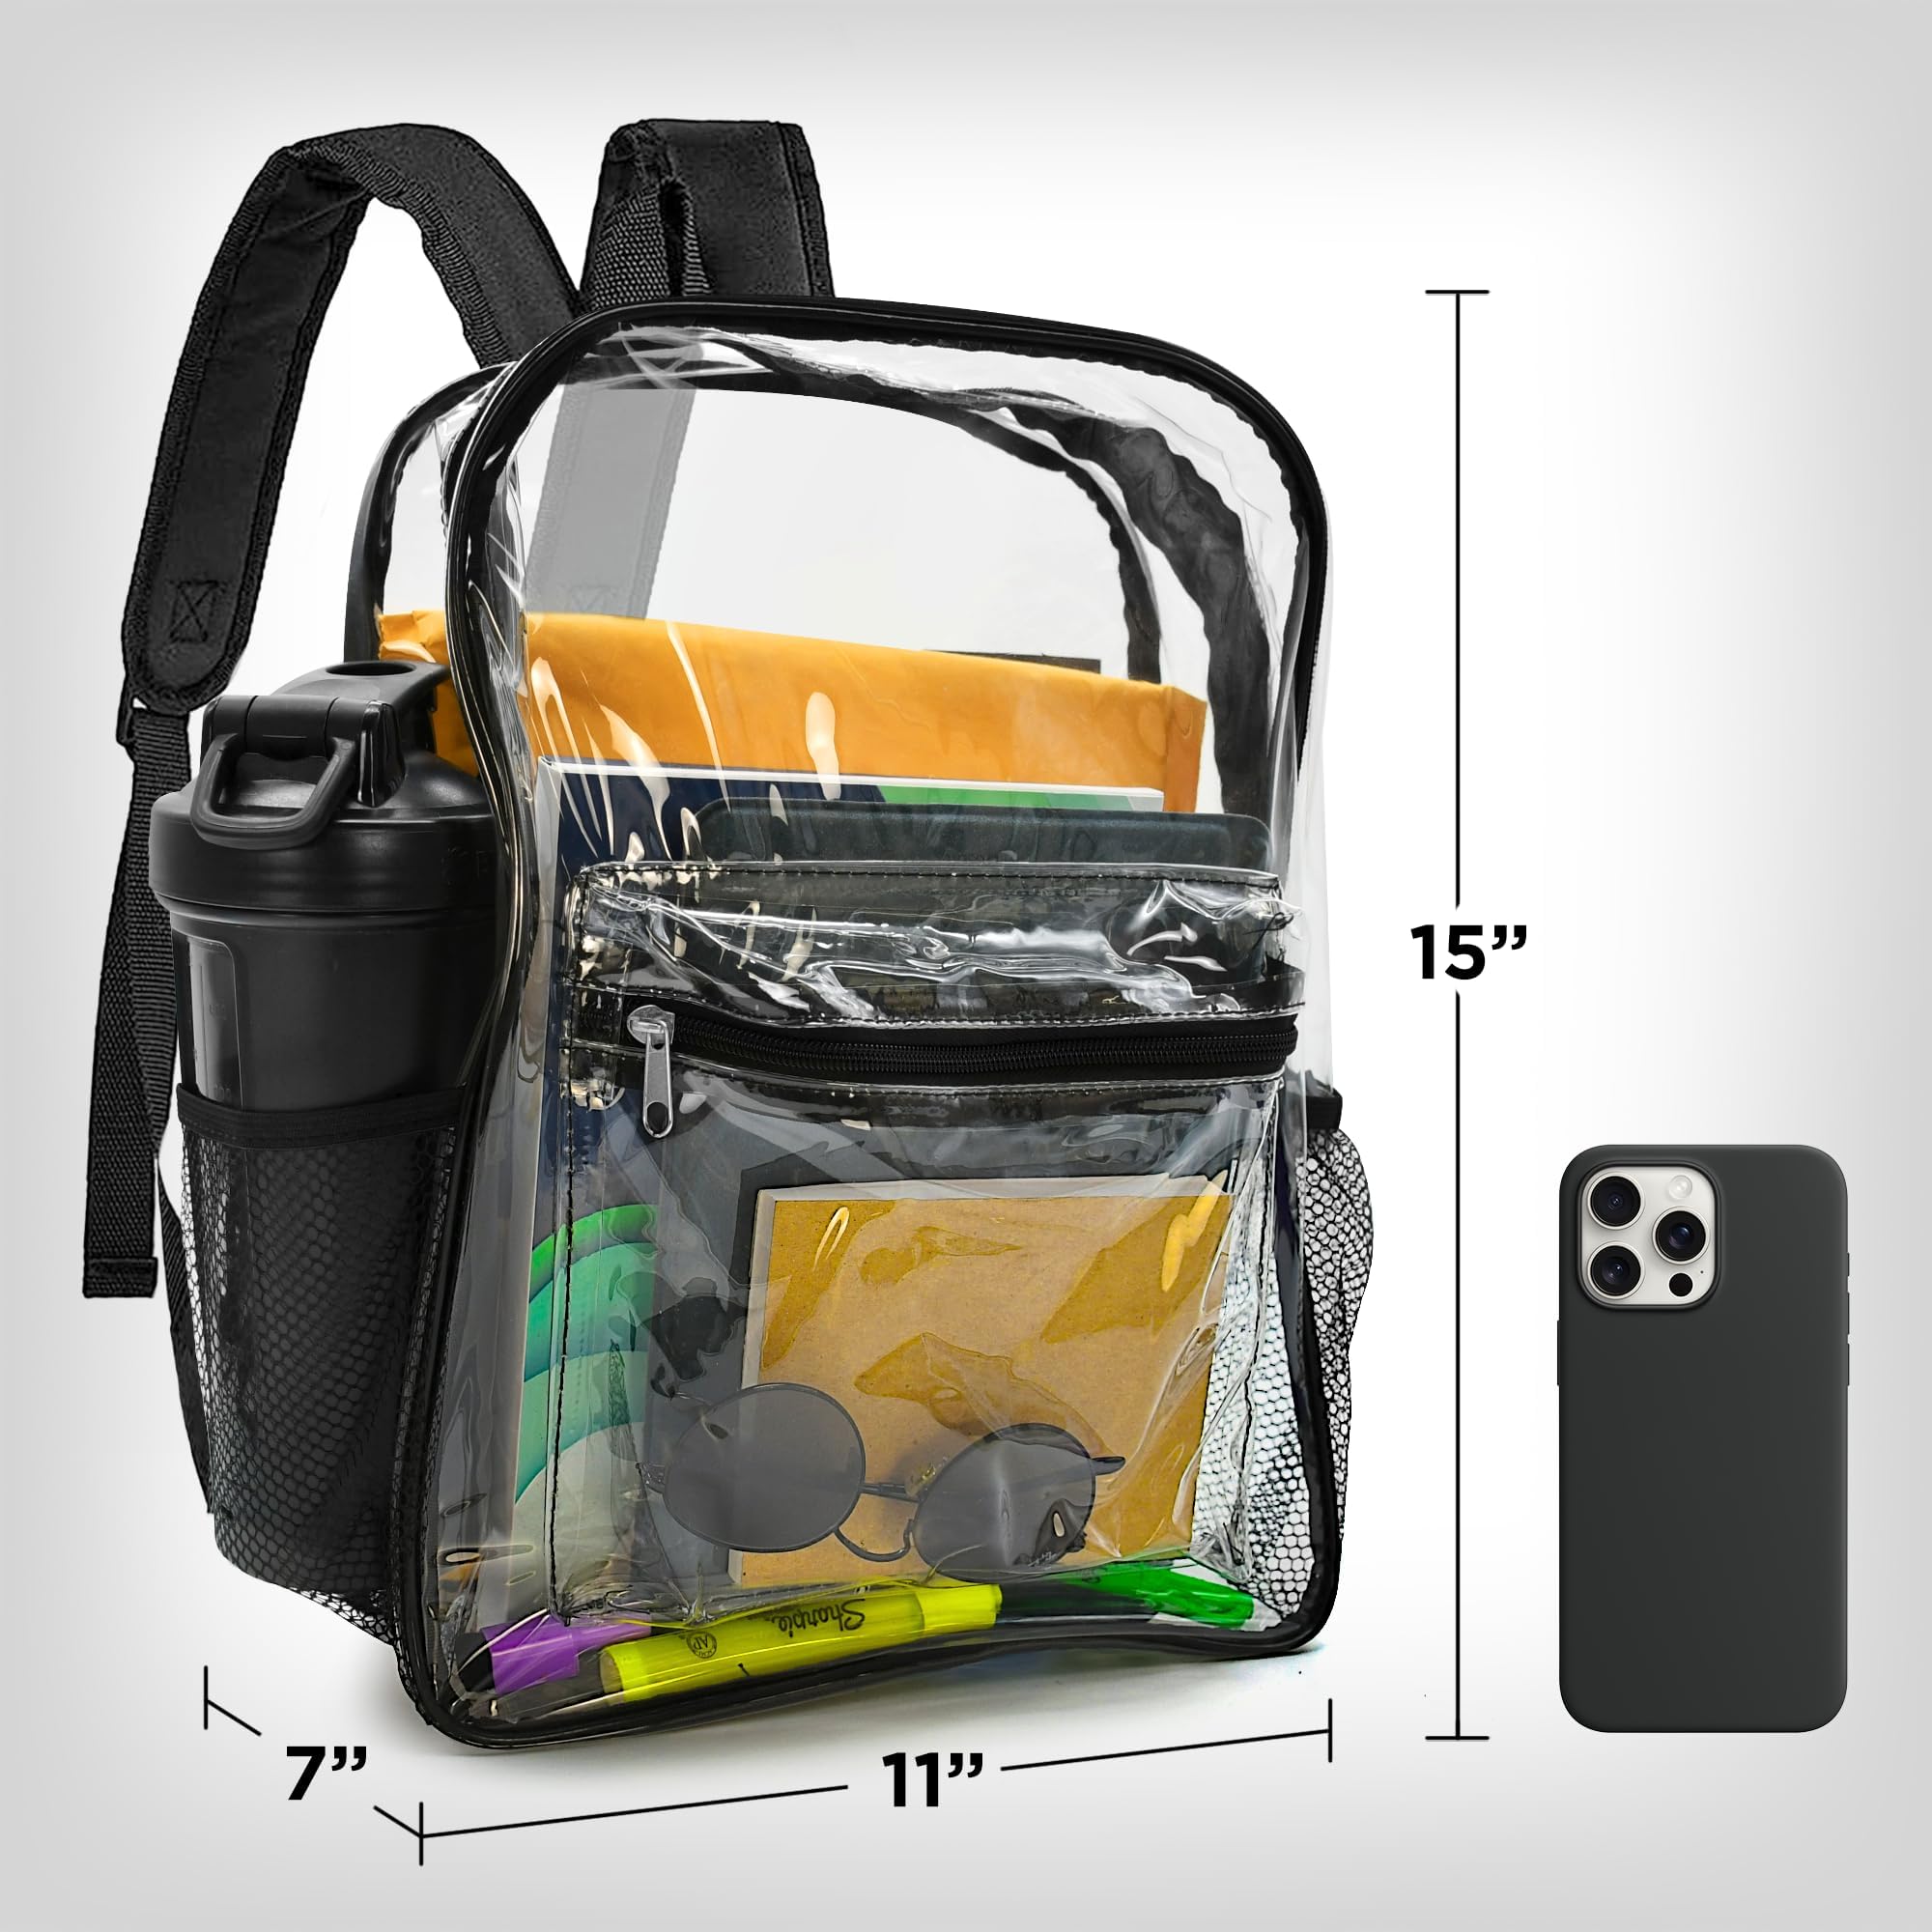 Guard Dog Security Clear Bag - Transparent Backpack for Sports Event and Concerts, 15 x 11 x 5 inches, Small